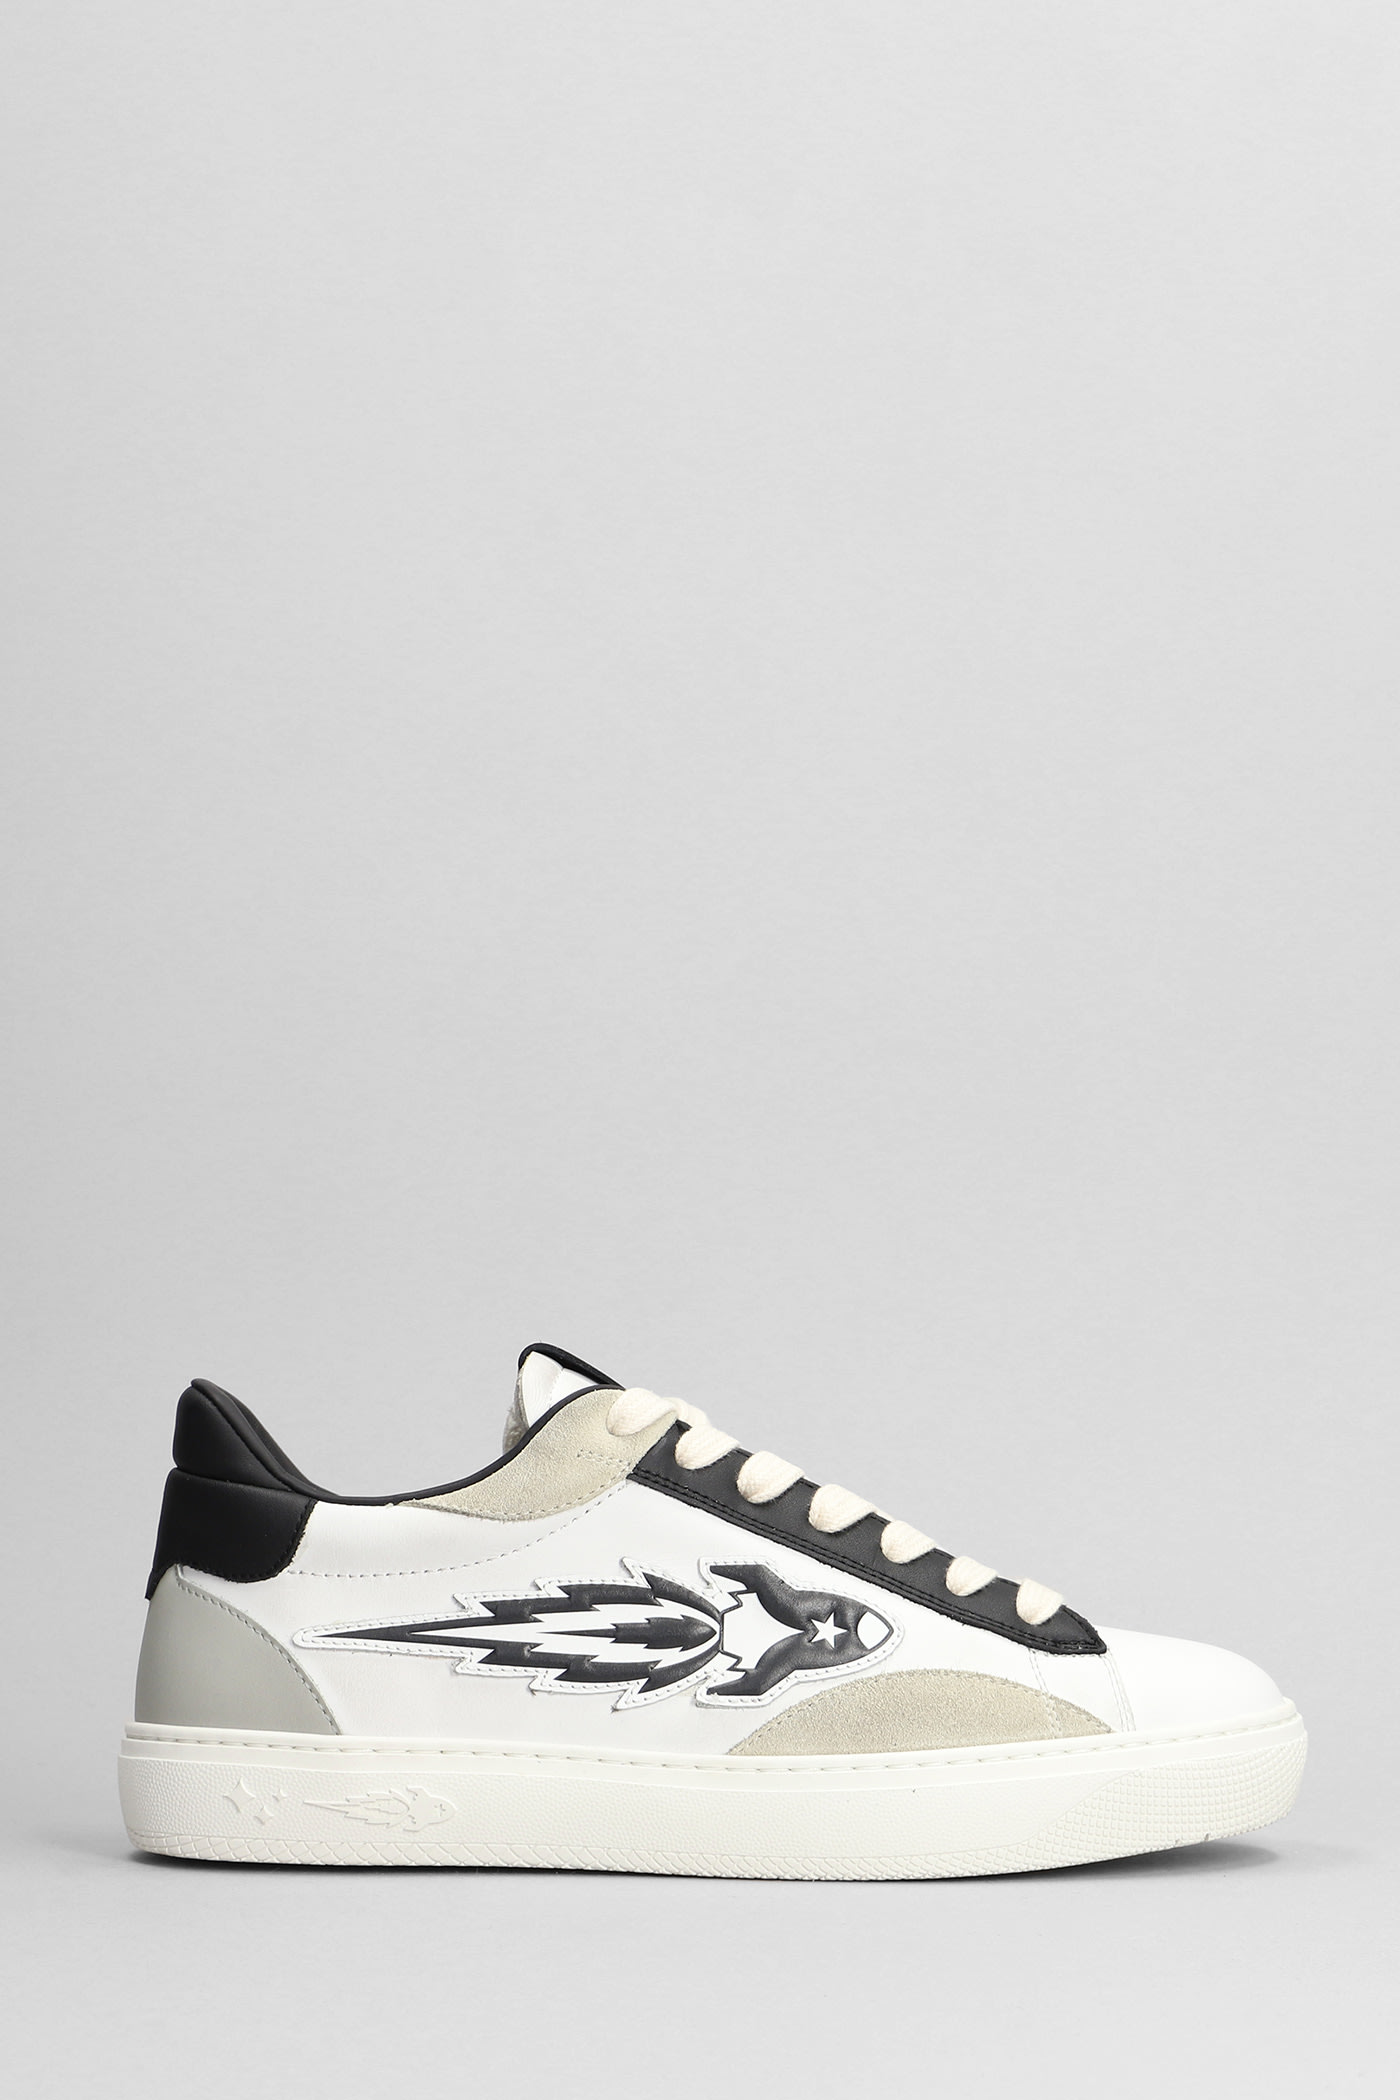 Enterprise Japan Trainers In White Suede And Leather